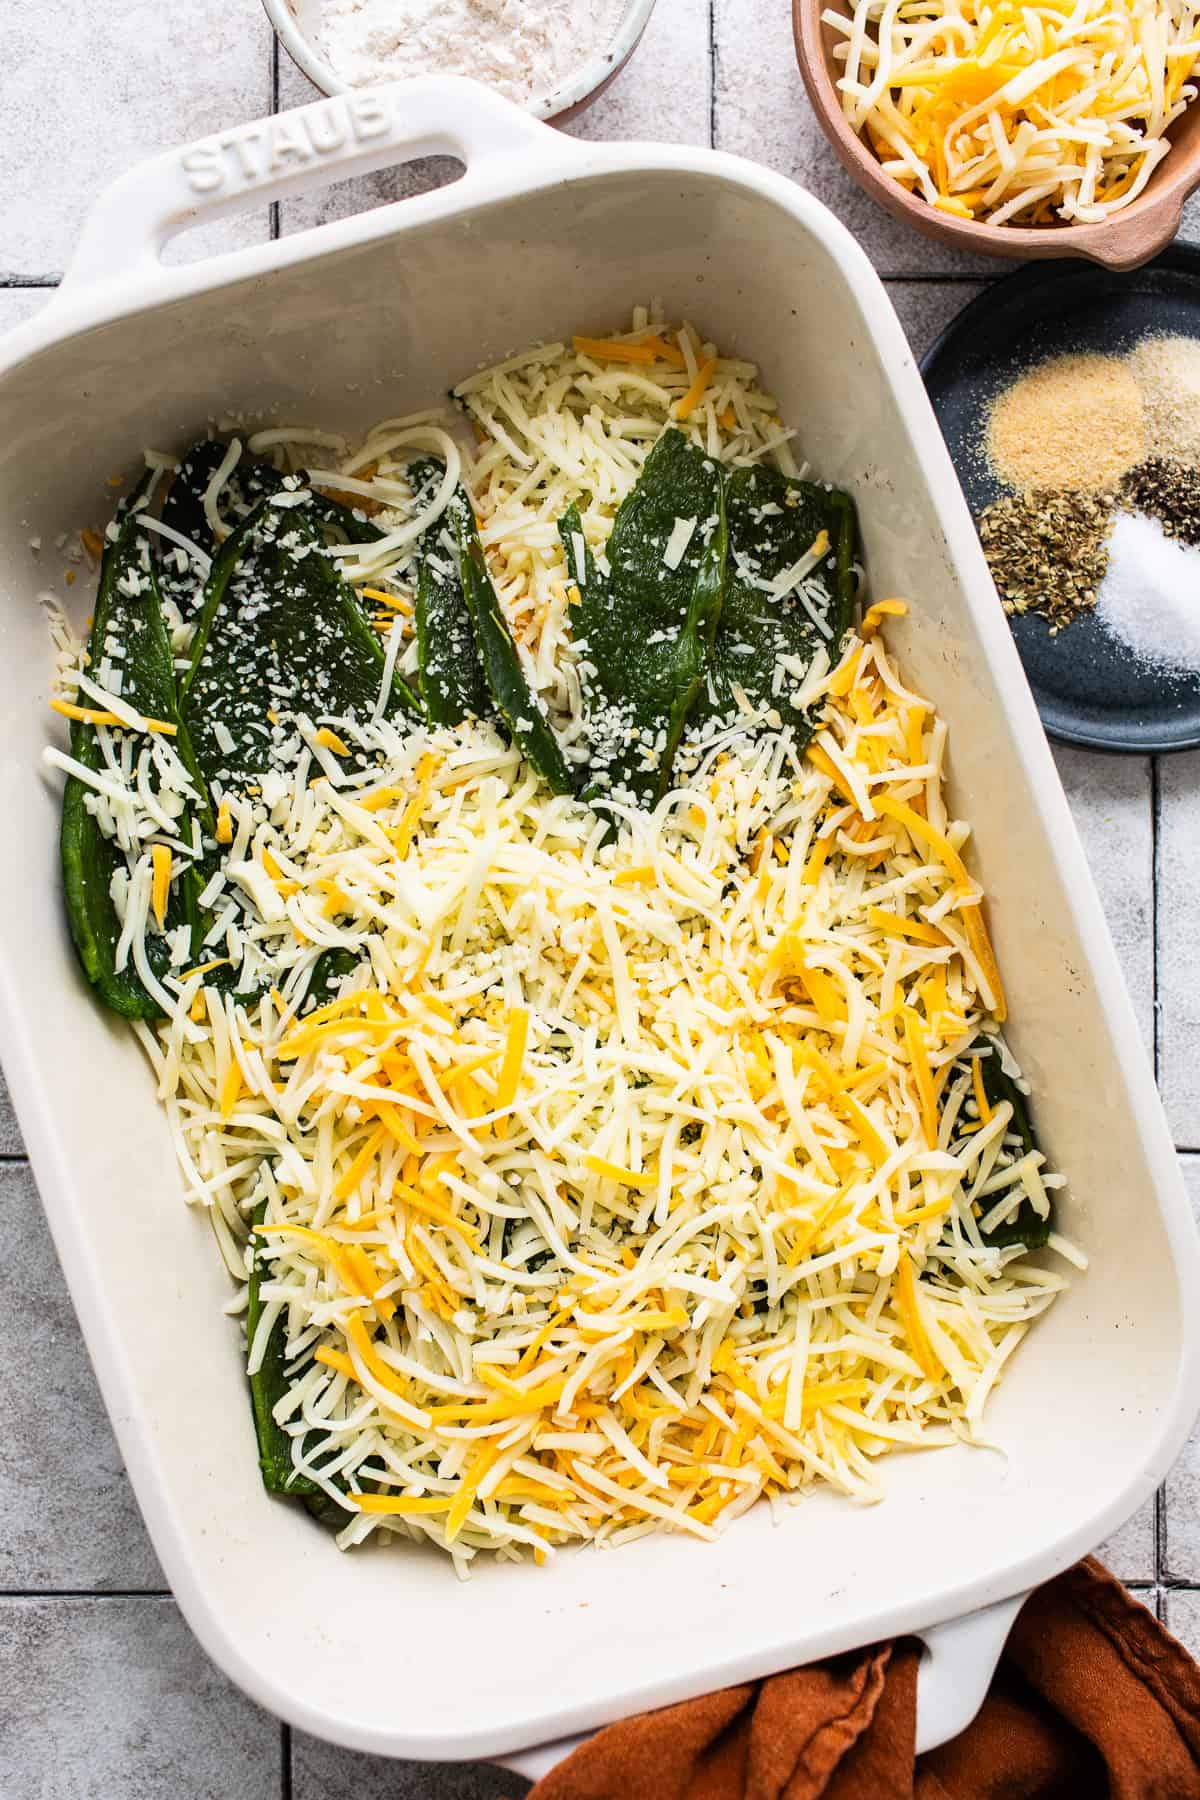 Roasted poblano peppers in a baking dish with shredded cheese.